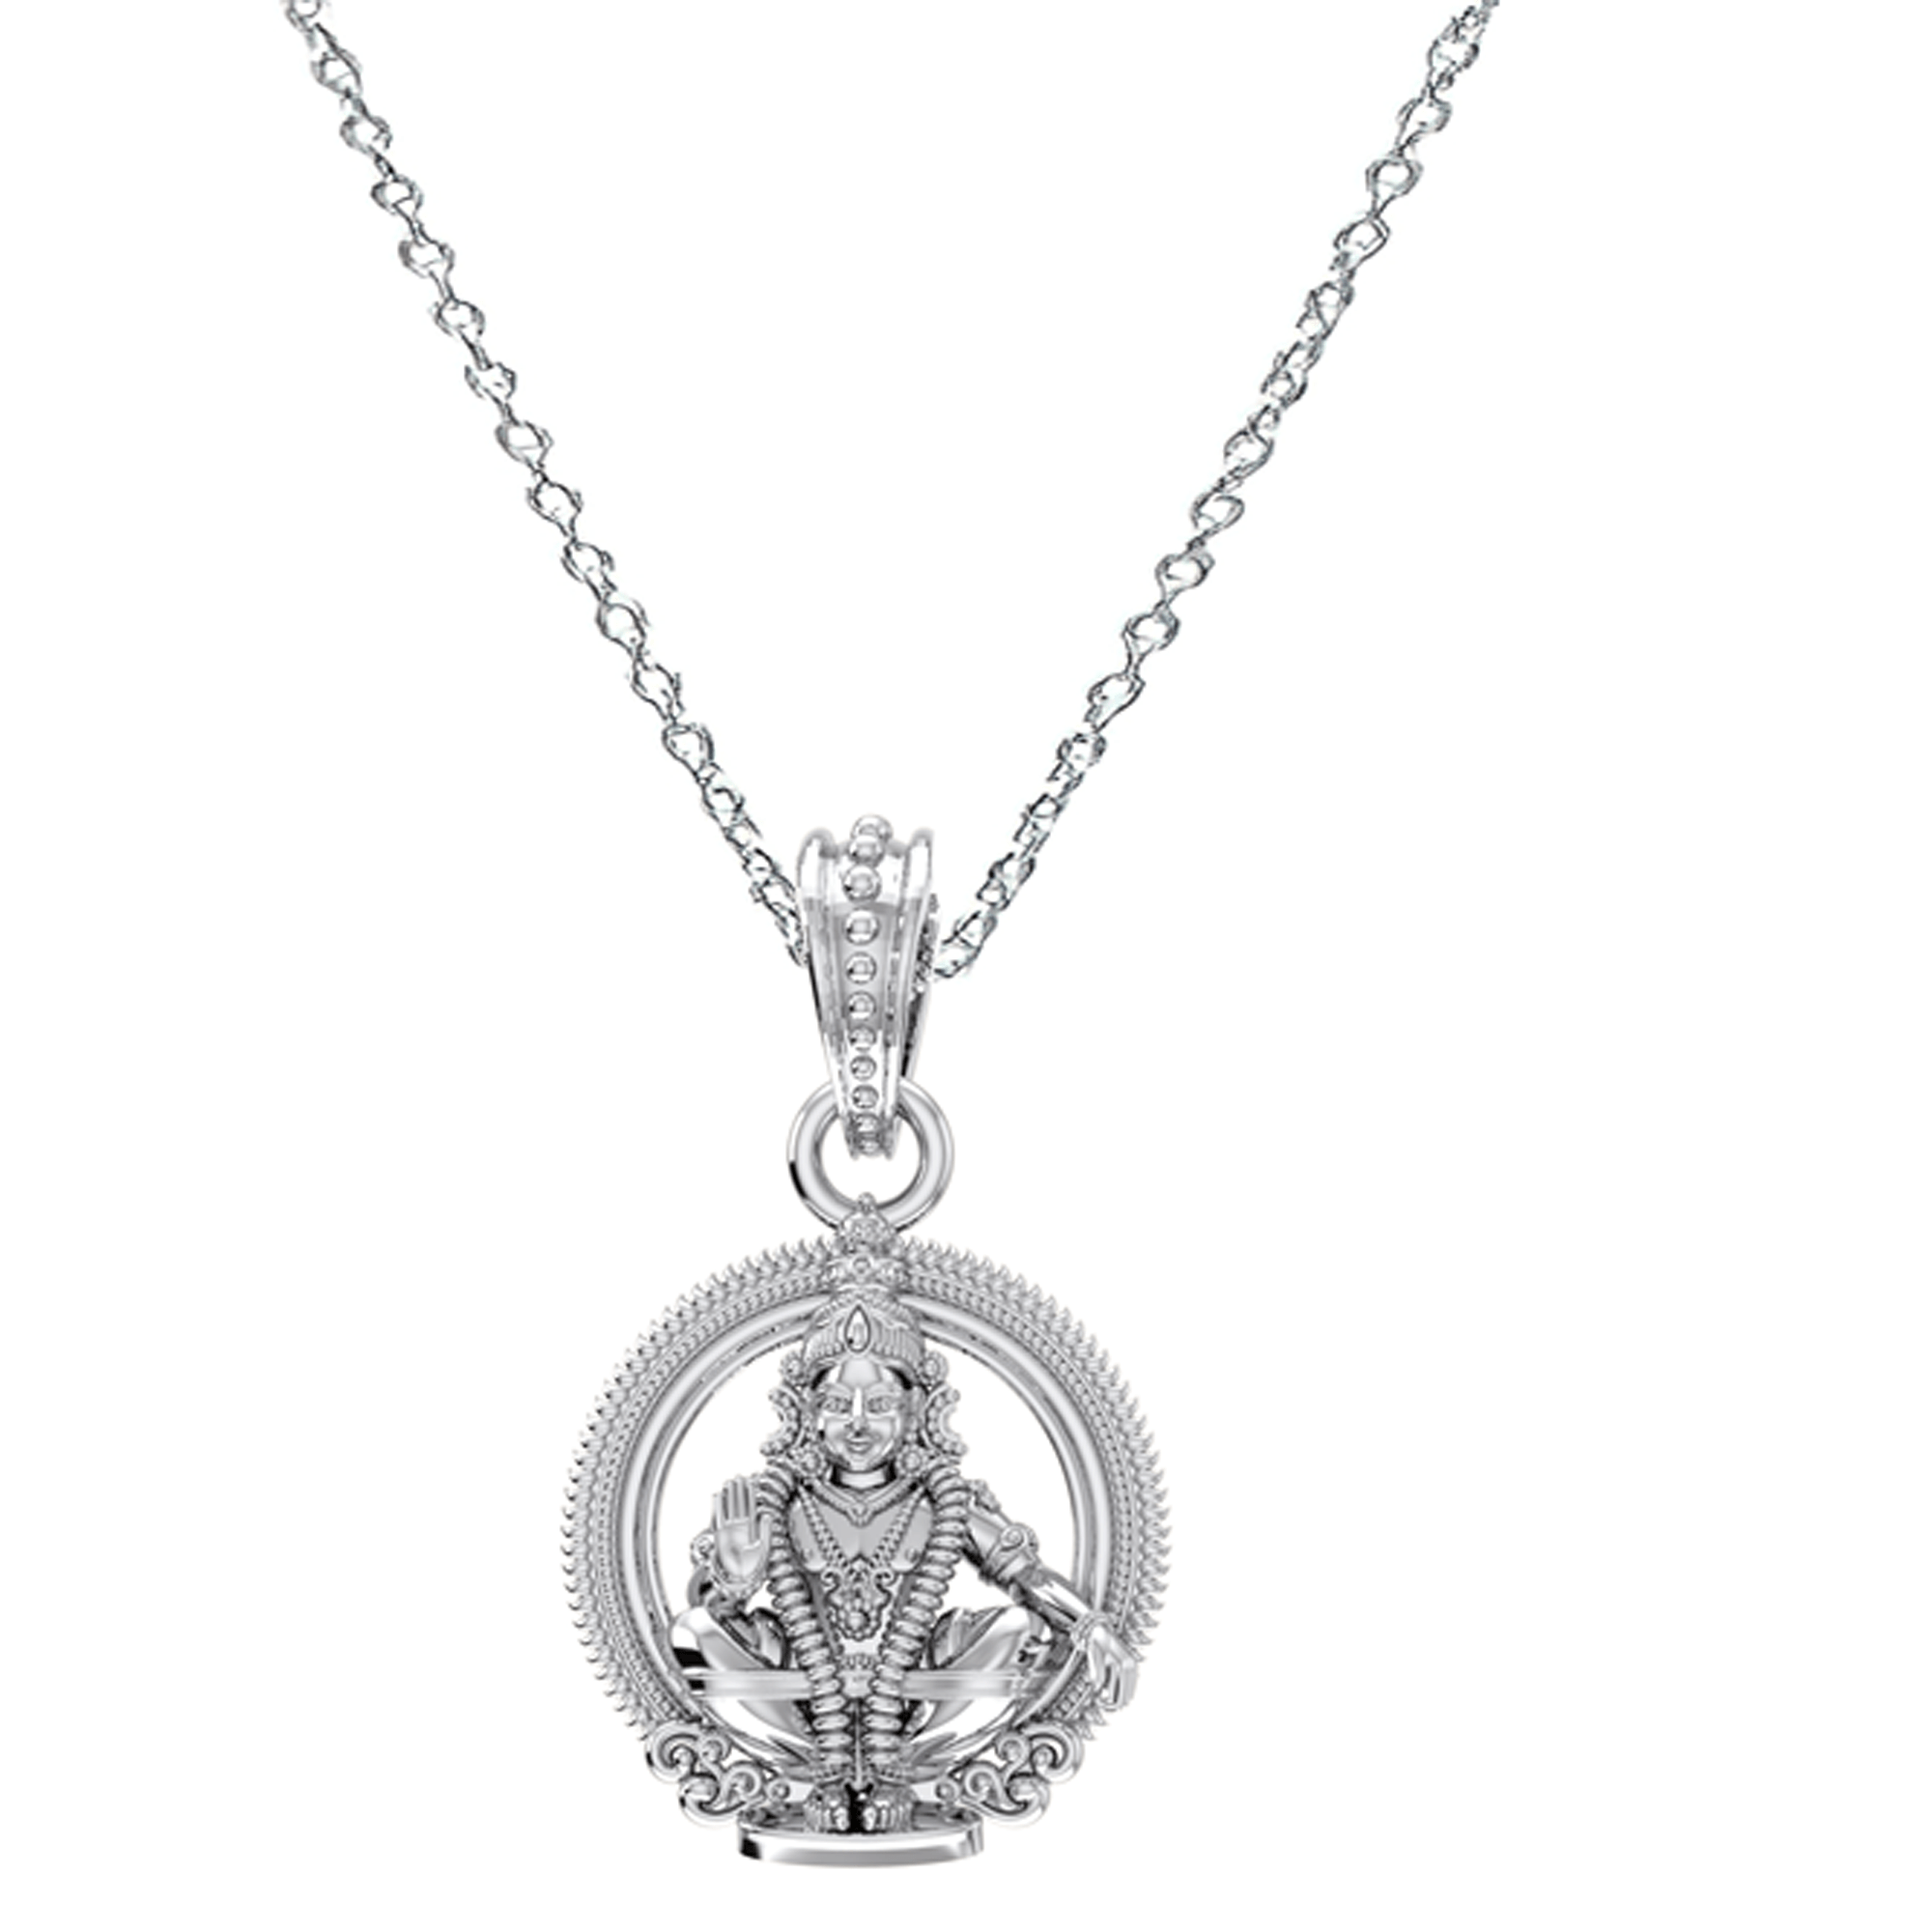 Akshat Sapphire Sterling Silver (92.5% purity) God Ayyappa Chain Pendant (Pendant with Anchor Chain-22 inches) for Men & Women Pure Silver Lord Ayyappa Chain Locket